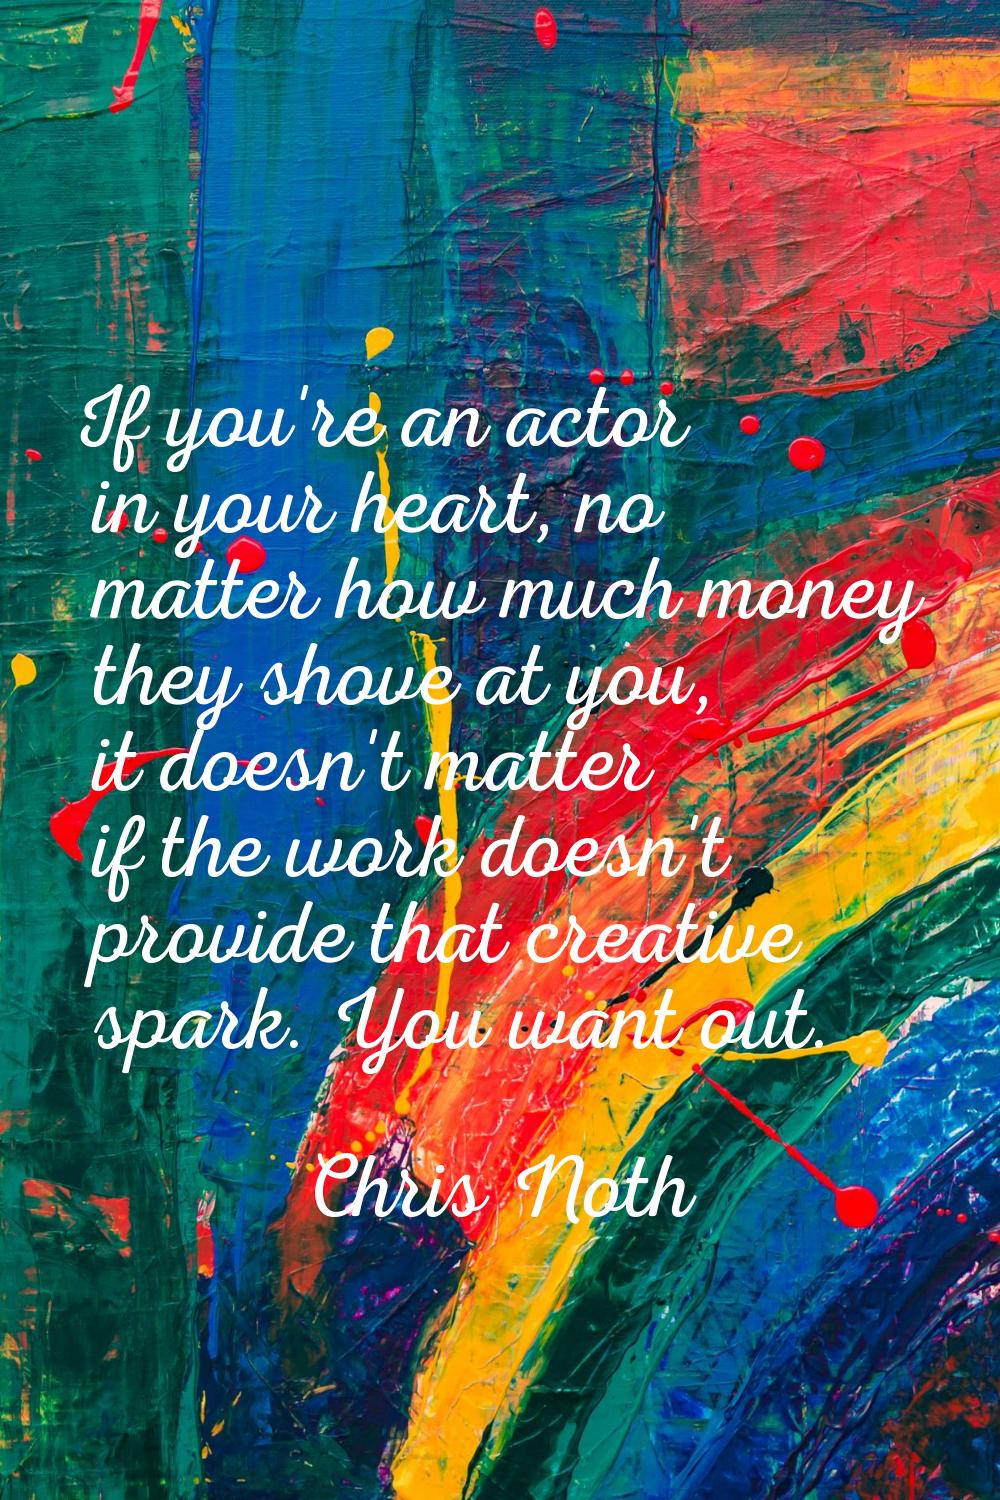 If you're an actor in your heart, no matter how much money they shove at you, it doesn't matter if 